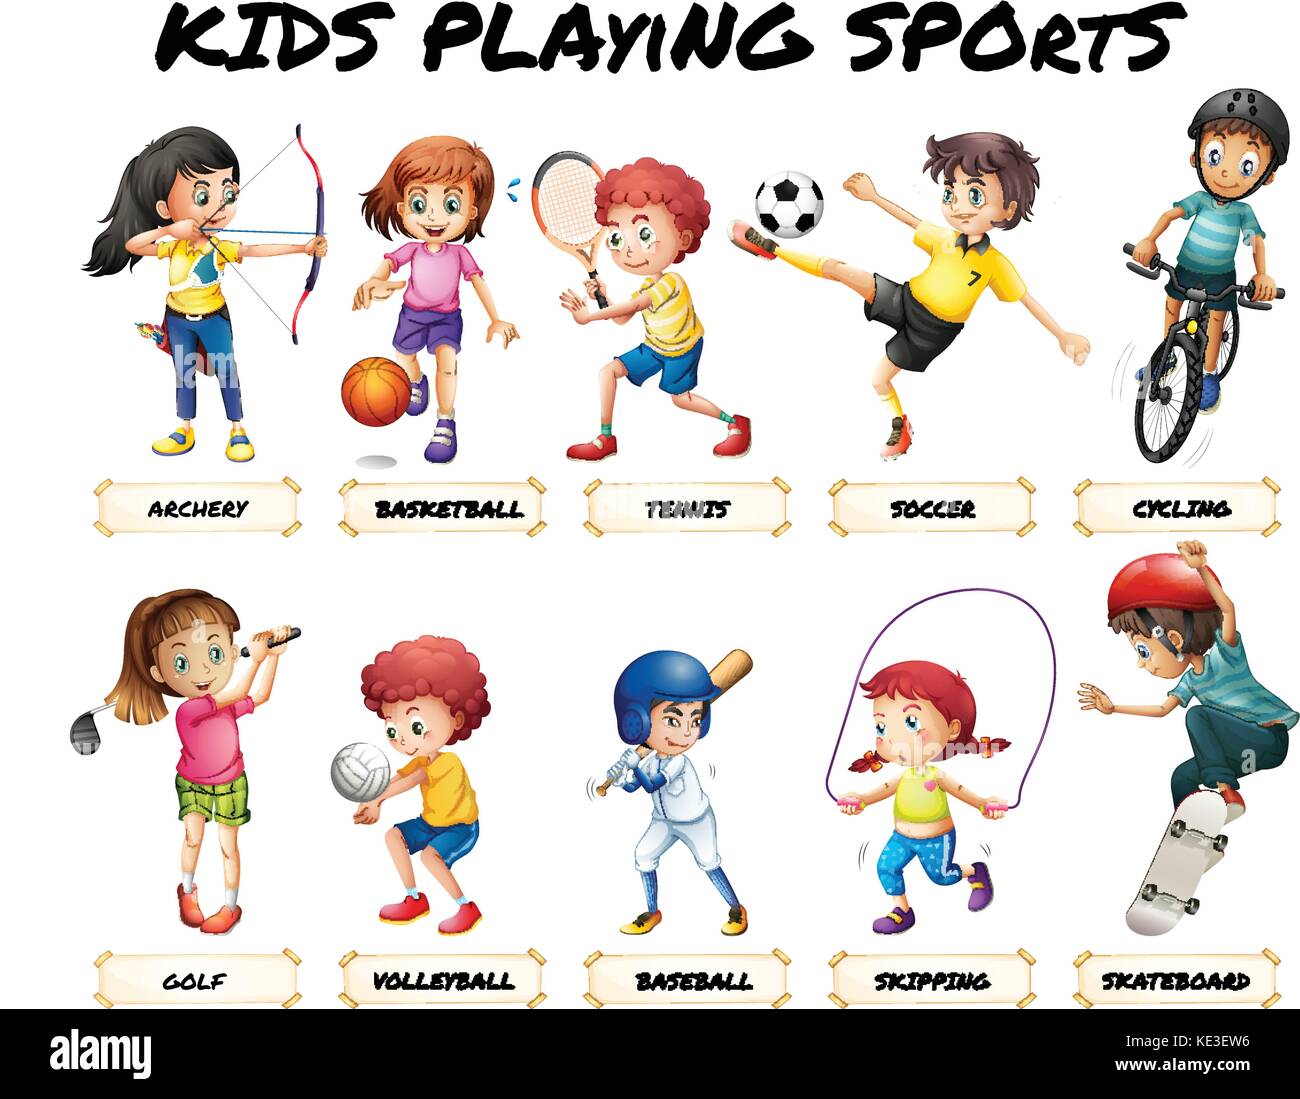 Boys and girls playing sports illustration Stock Vector